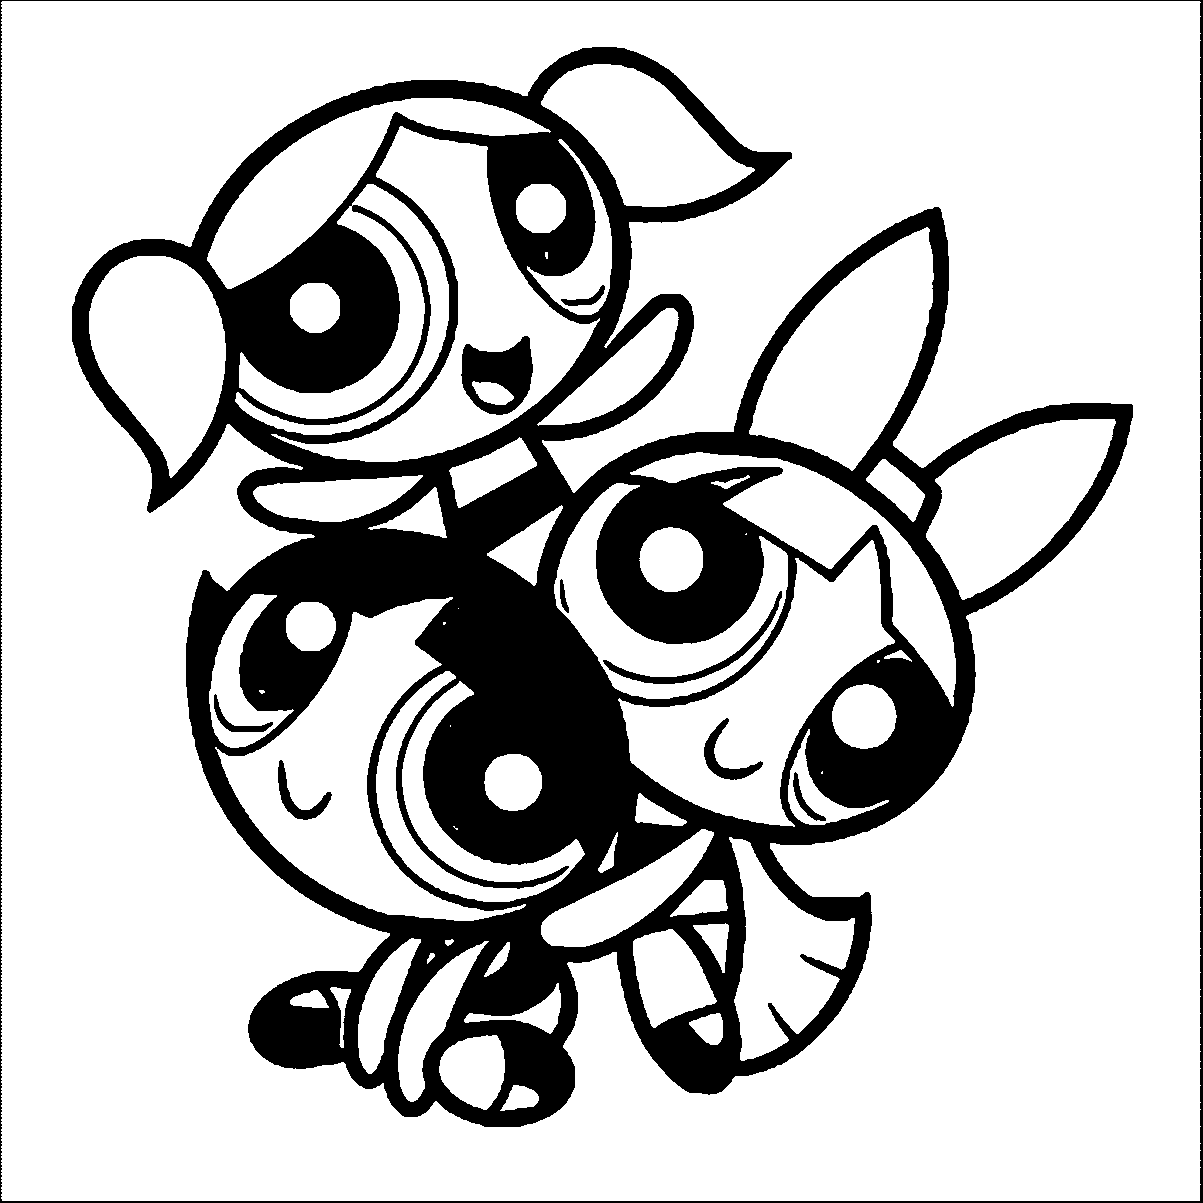 Cute Powerpuff Girls Coloring Page - Free Printable ...